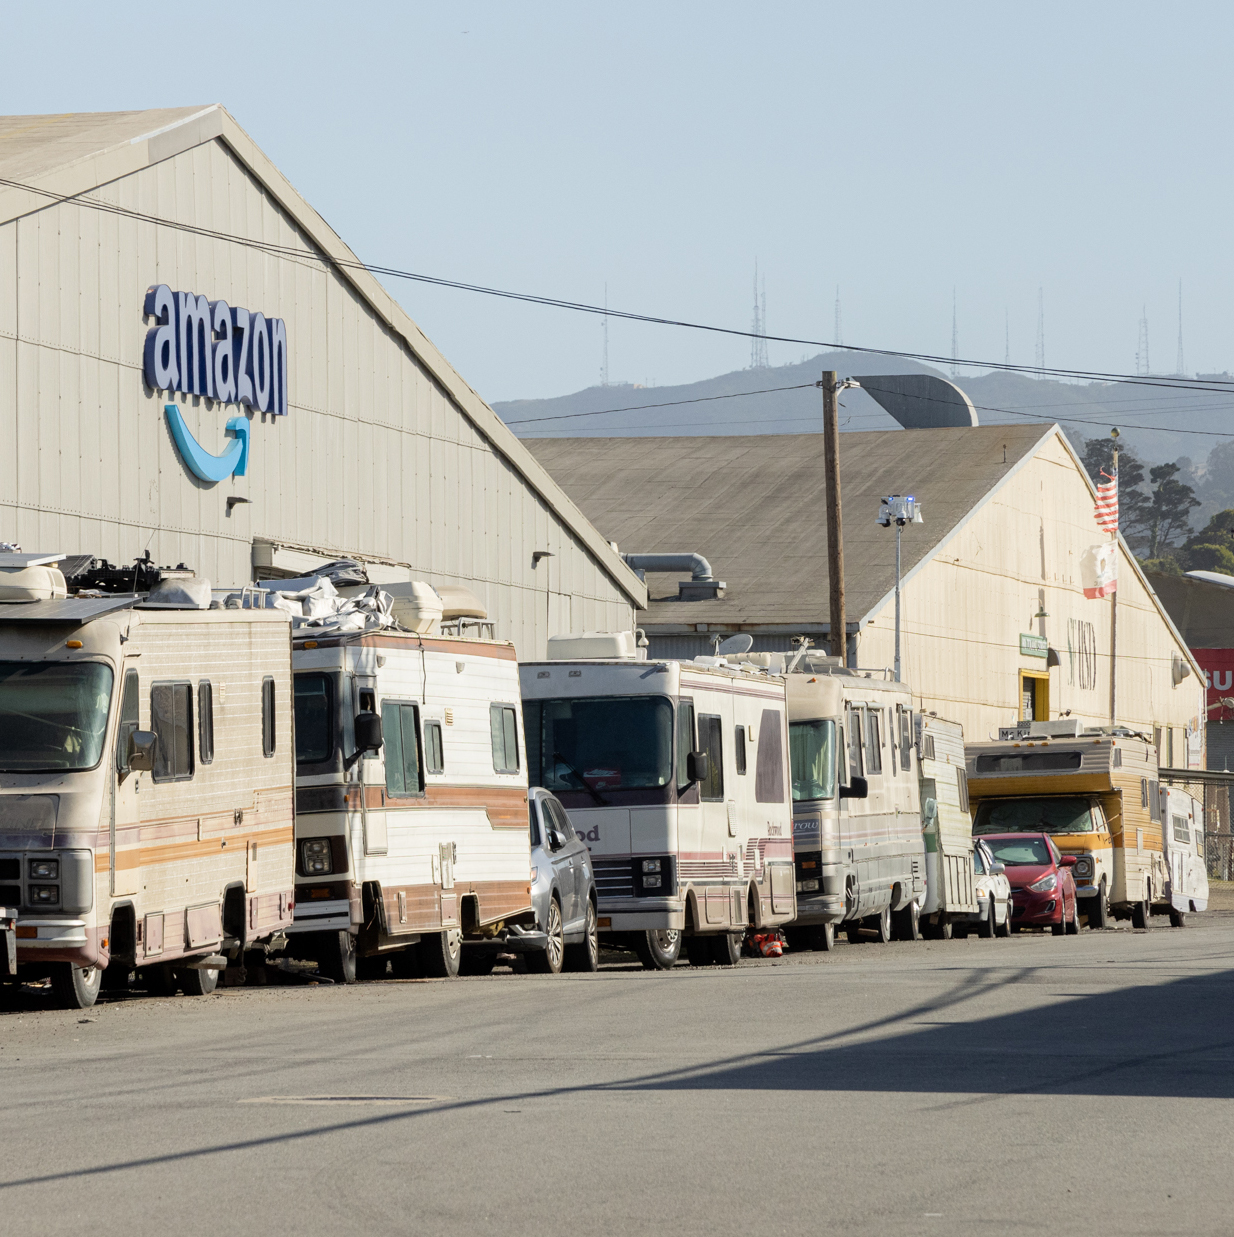 A row of RVs and cars are parked alongside a large building with the &quot;Amazon&quot; logo, backed by a mountainous landscape and electrical towers in the distance.